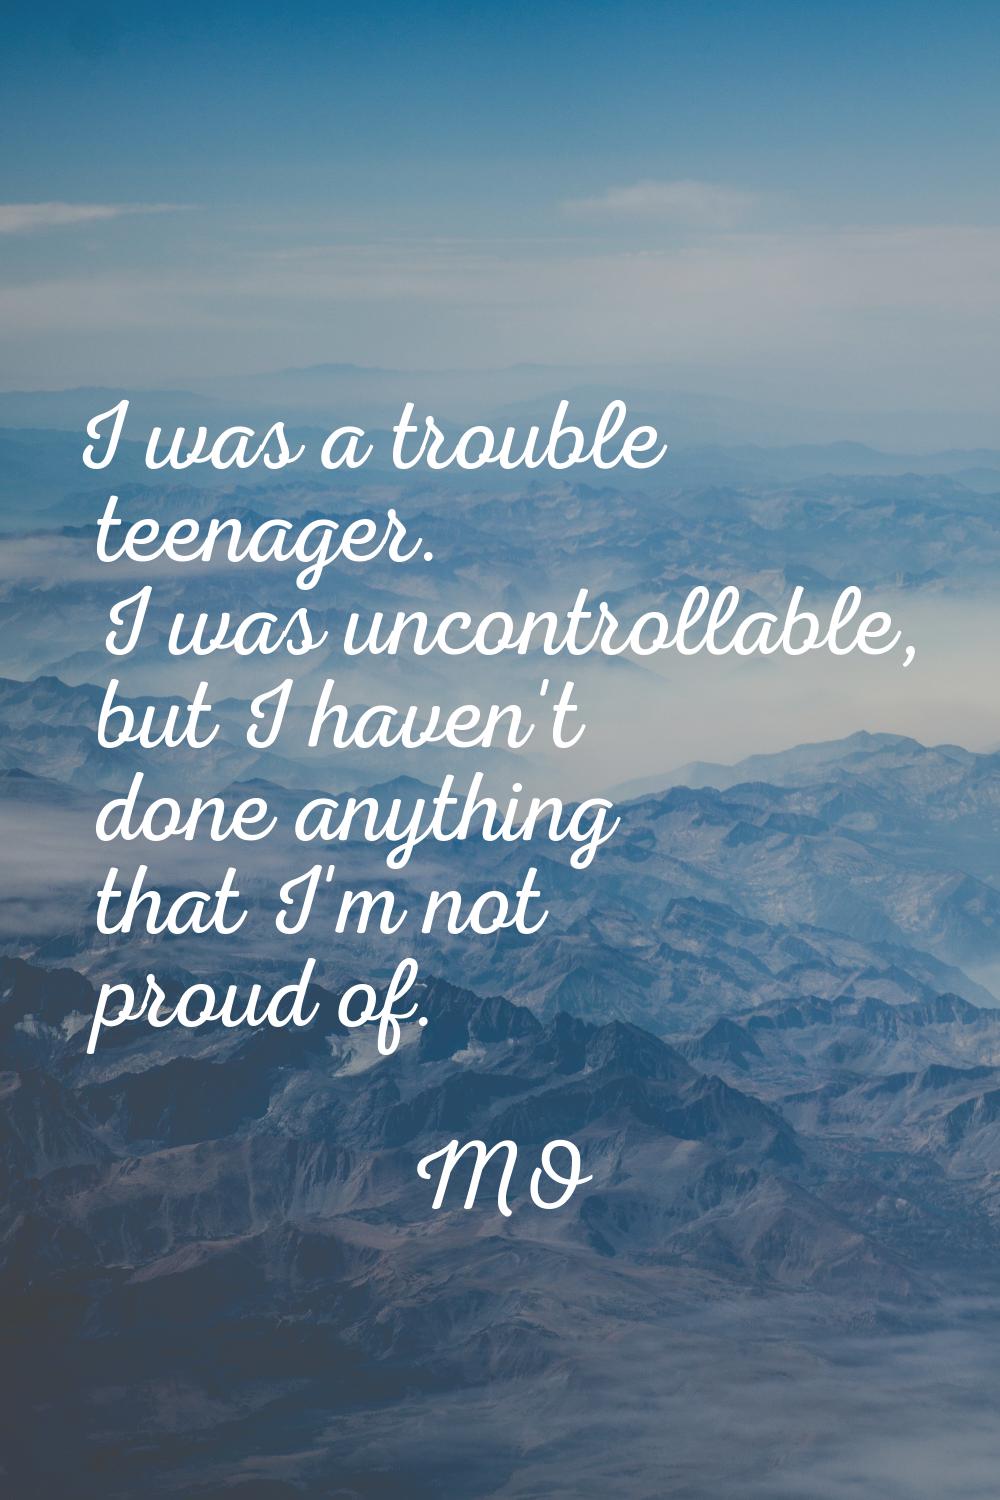 I was a trouble teenager. I was uncontrollable, but I haven't done anything that I'm not proud of.